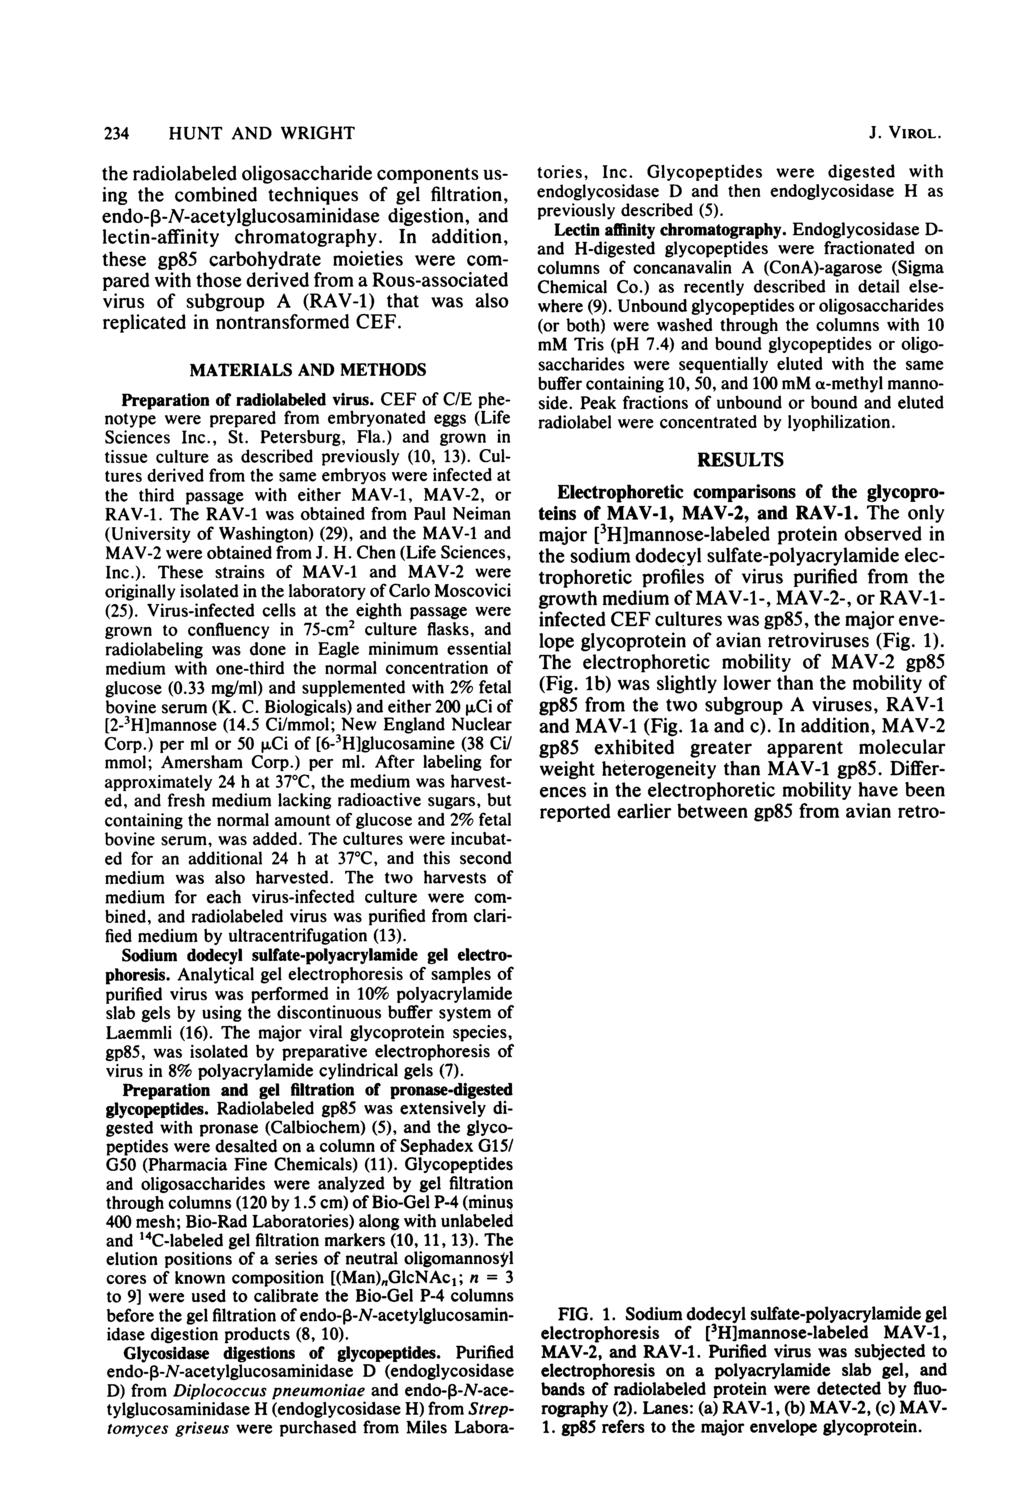 234 HUNT AND WRIGHT the radiolabeled oligosaccharide components using the combined techniques of gel filtration, endo-p-n-acetylglucosaminidase digestion, and lectin-affinity chromatography.